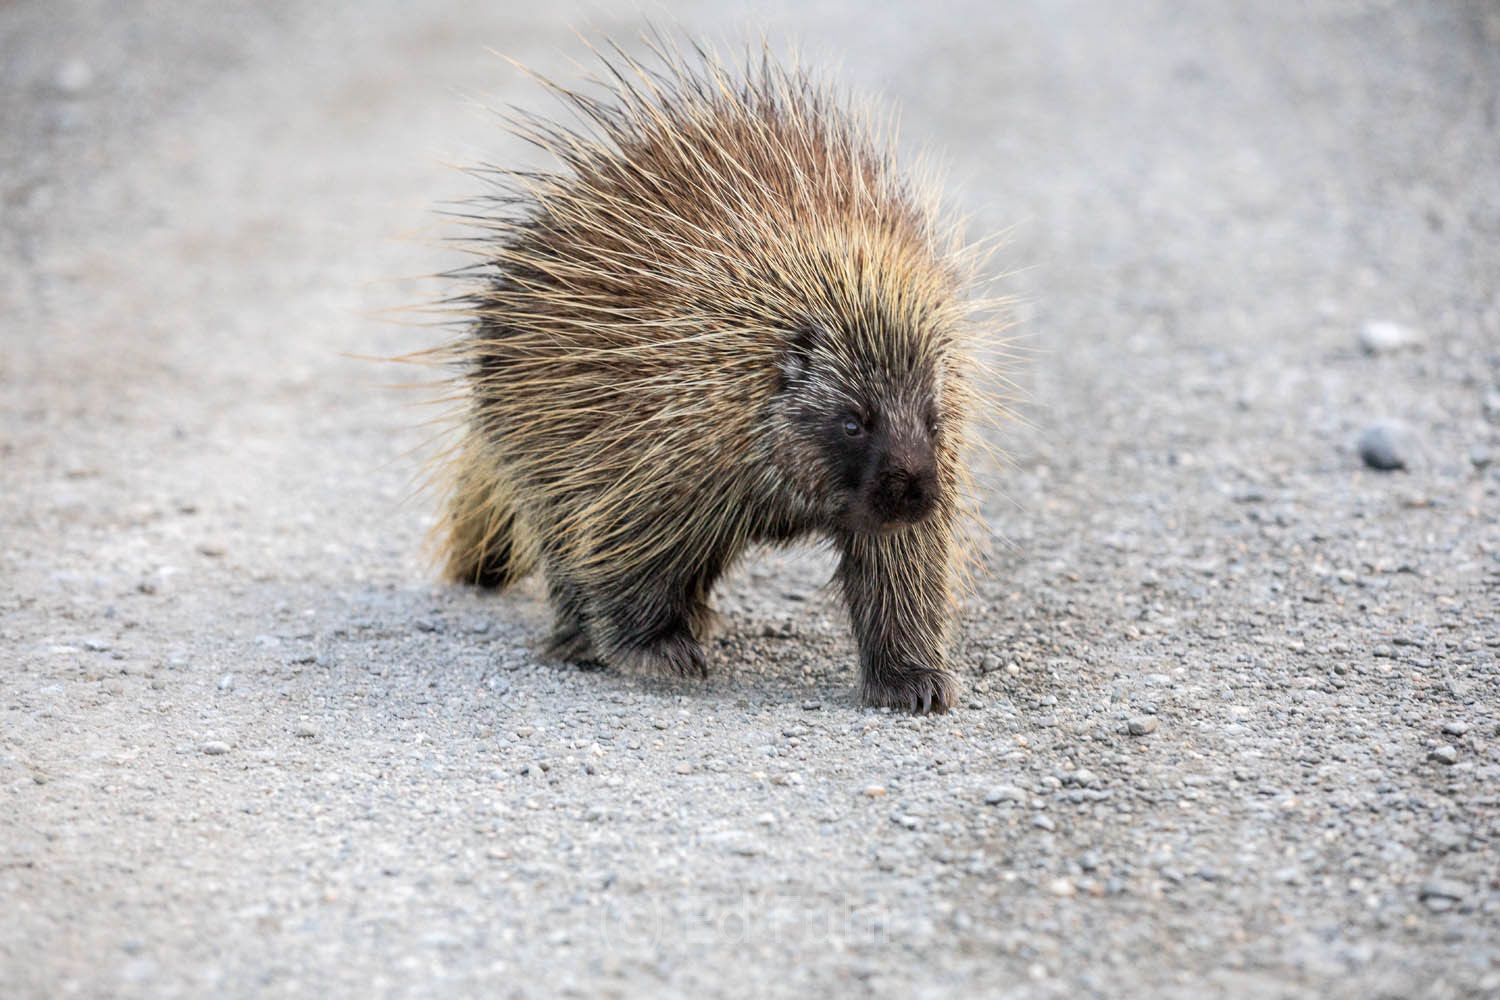 A well-protected porcupine slowly ambles down the Park Road after sunrise.